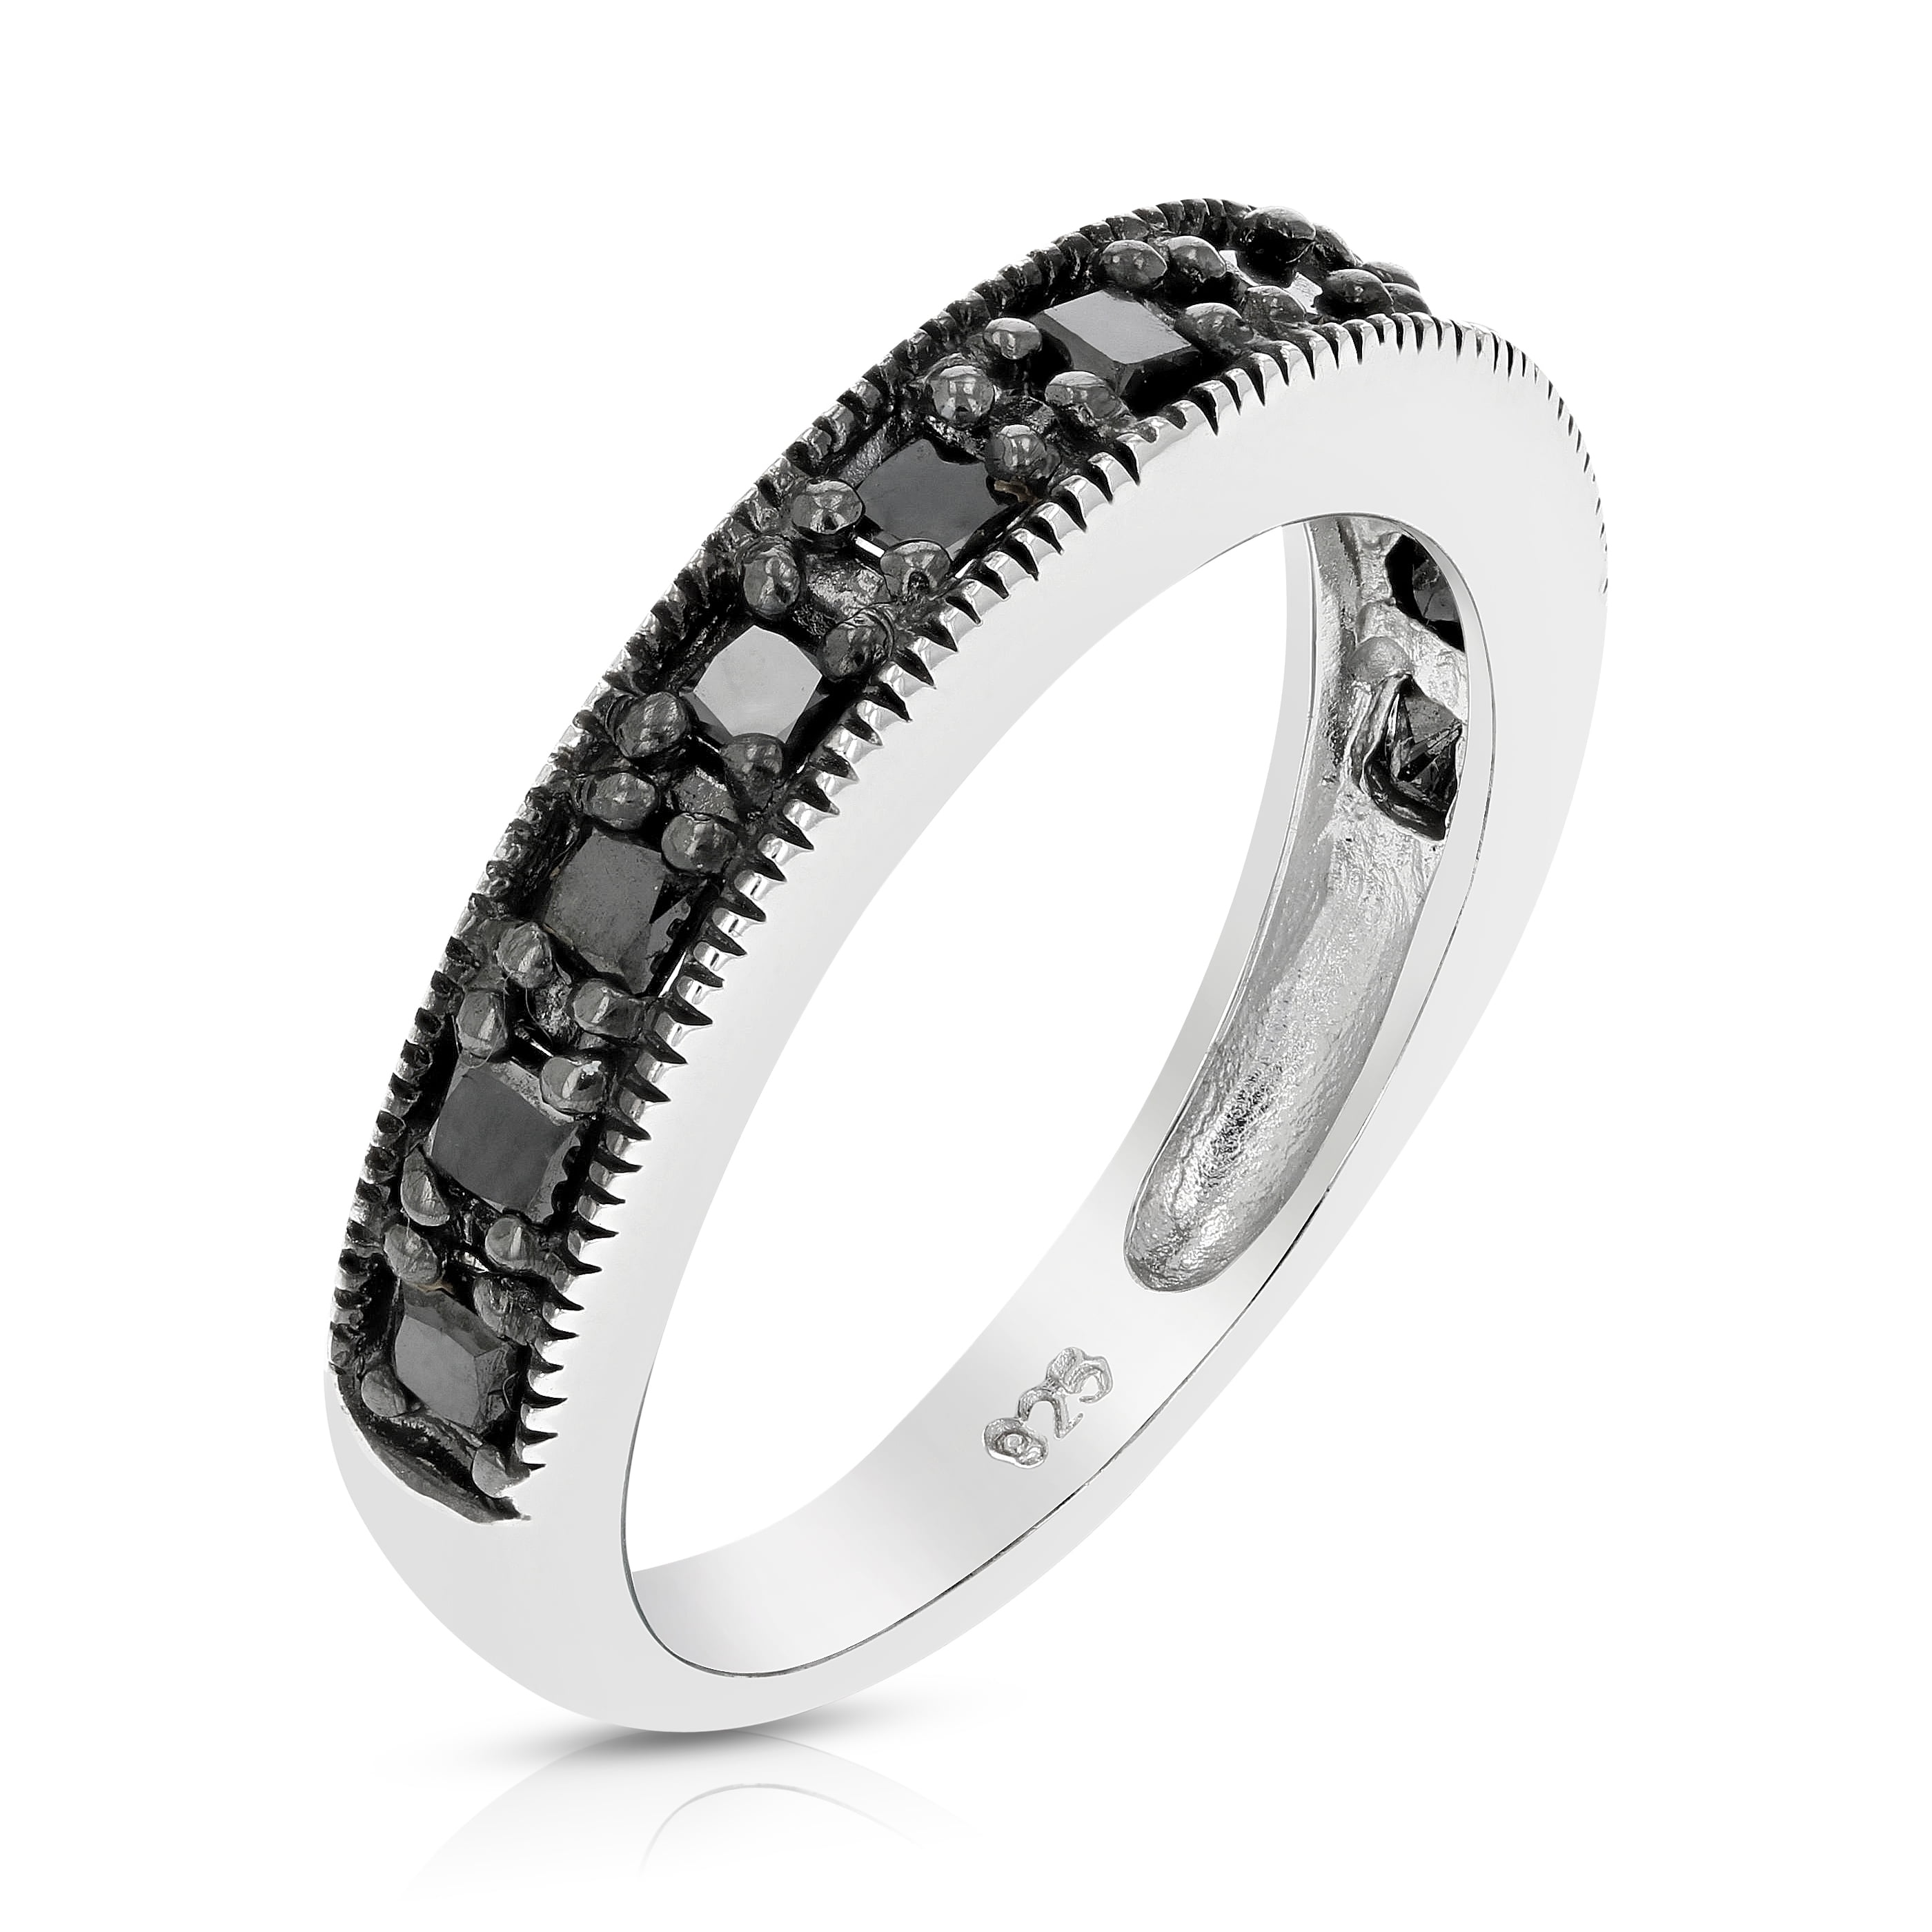 1/4 cttw Black Diamond Ring With Milgrain Setting in .925 Sterling Silver 